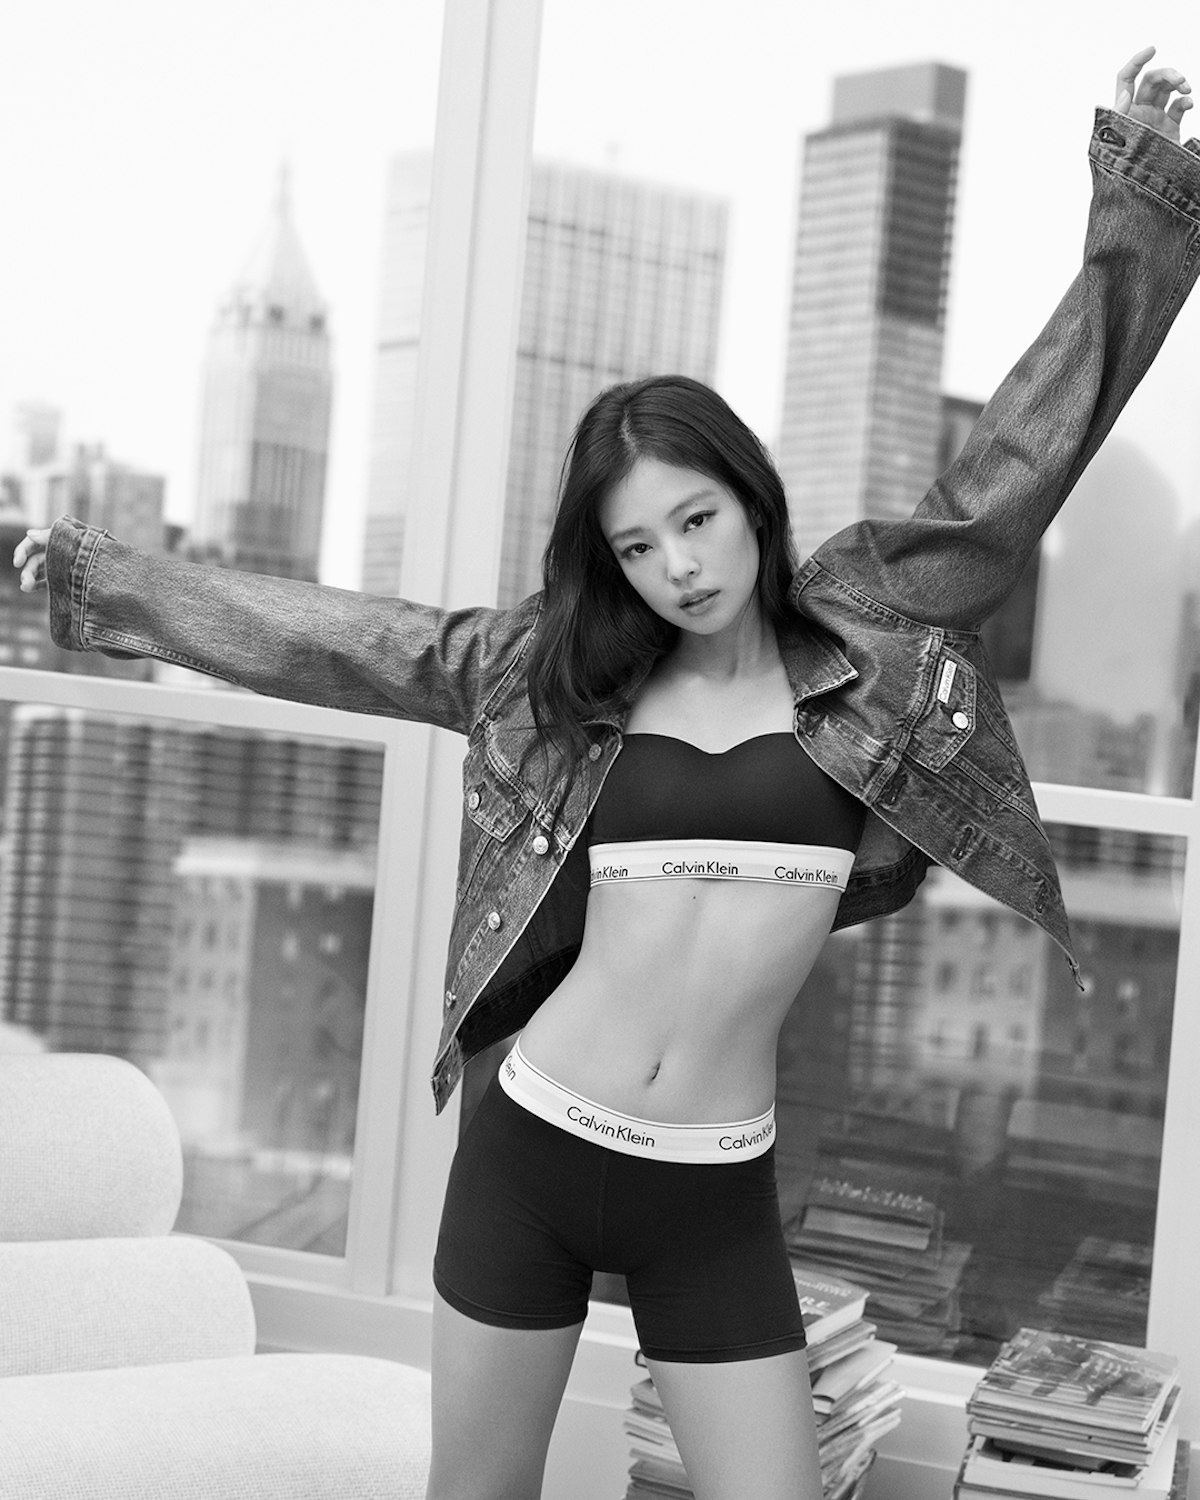 Jennie is back again with another sizzling Calvin Klein campaign